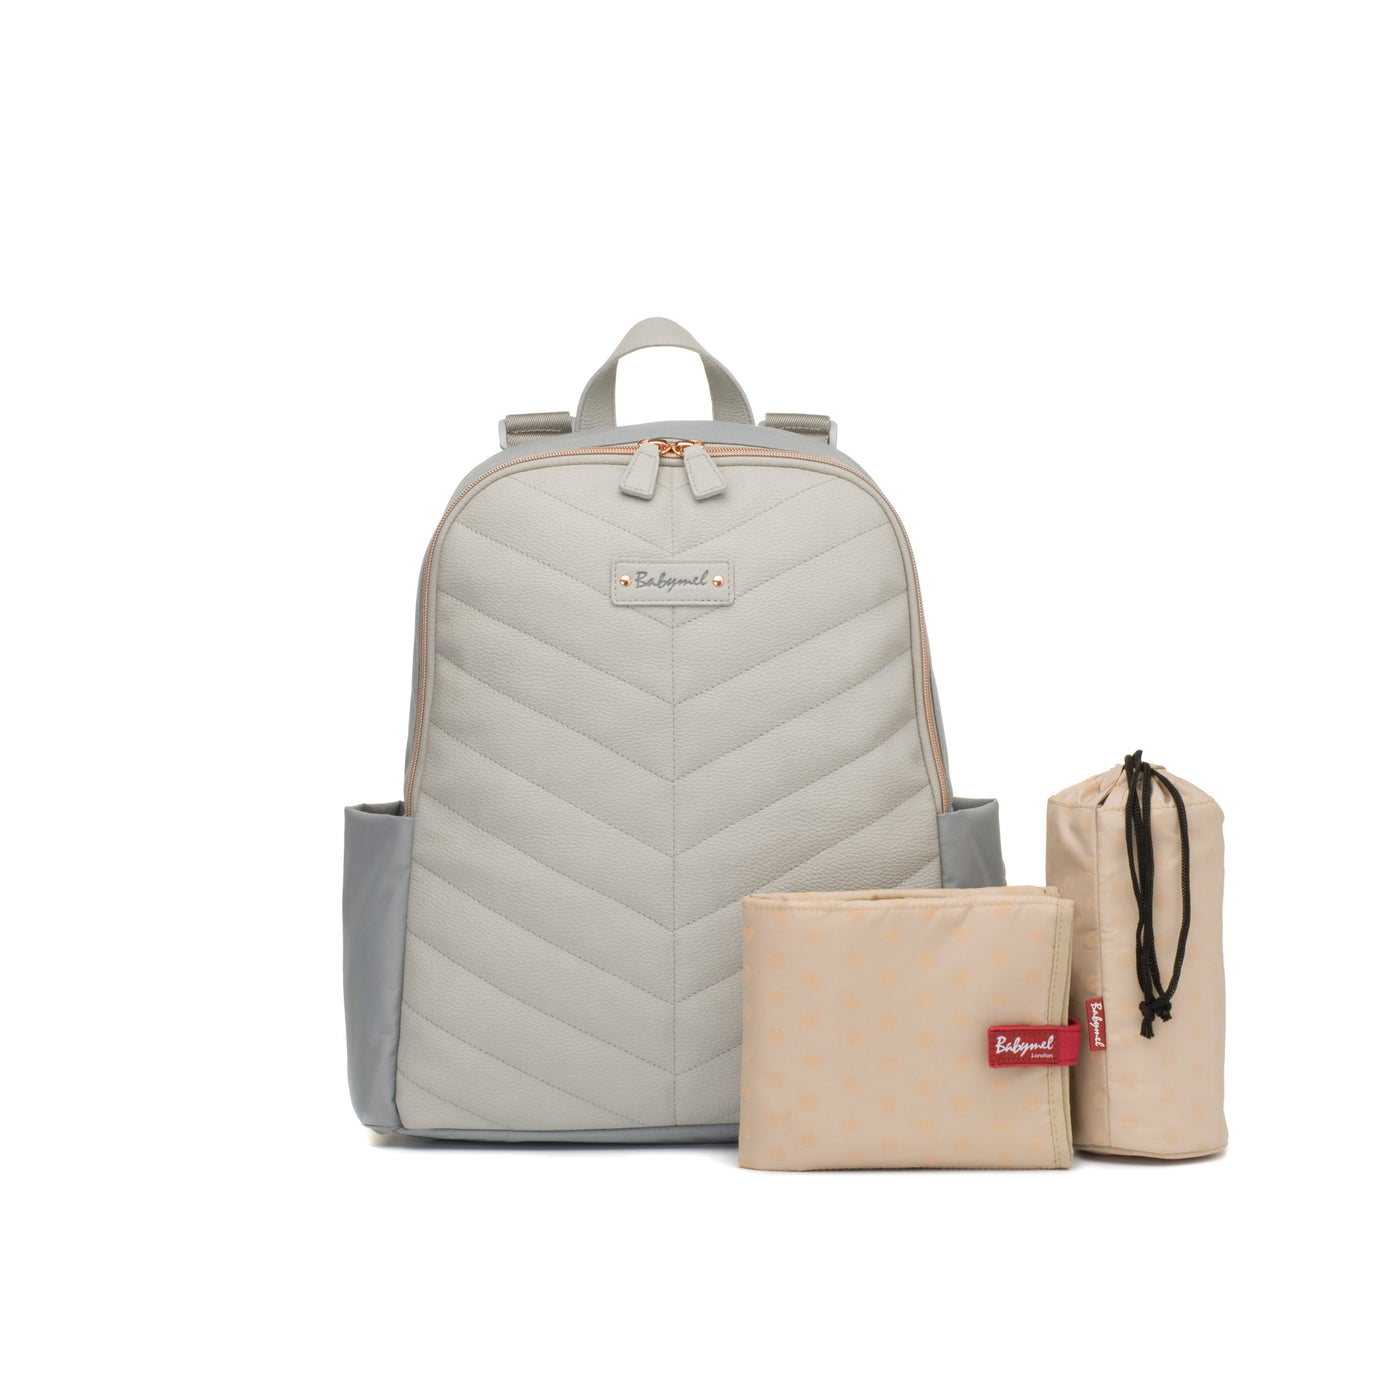 Gabby Backpack Nappy Bag with Vegan Faux Leather - Pale Grey